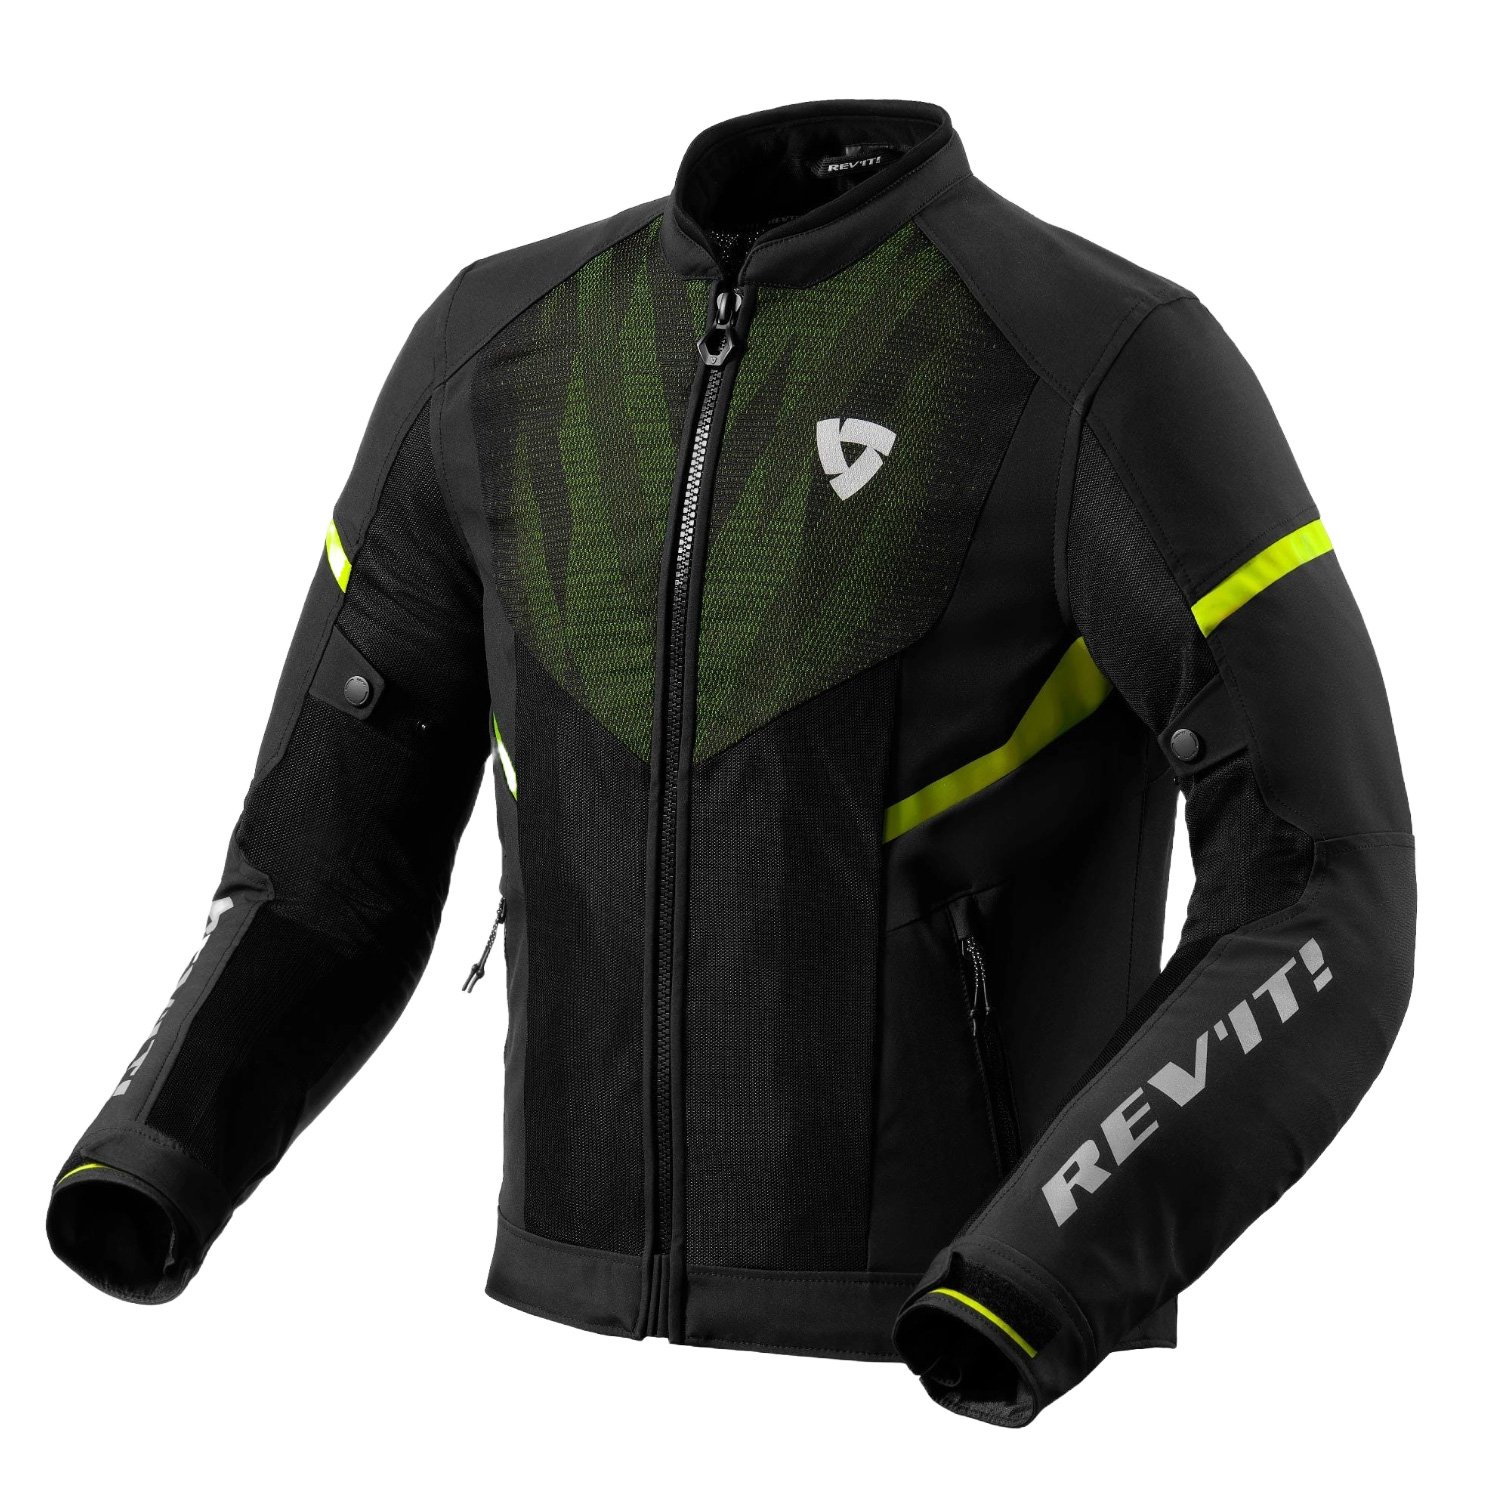 Image of REV'IT! Hyperspeed 2 GT Air Jacket Black Neon Yellow Talla 2XL